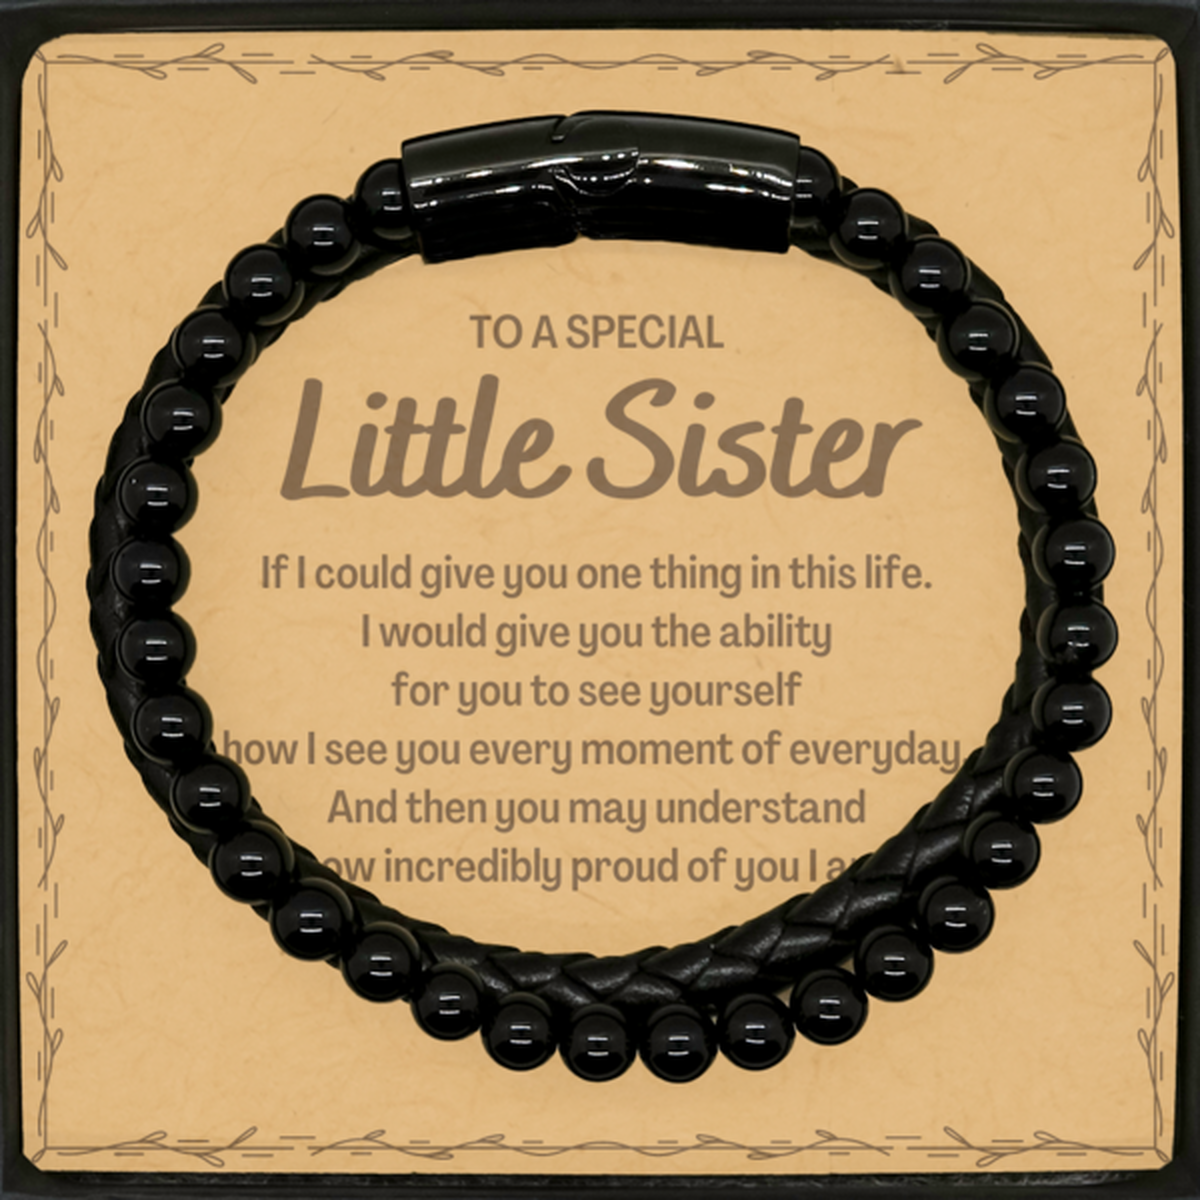 To My Little Sister Stone Leather Bracelets, Gifts For Little Sister Message Card, Inspirational Gifts for Christmas Birthday, Epic Gifts for Little Sister To A Special Little Sister how incredibly proud of you I am